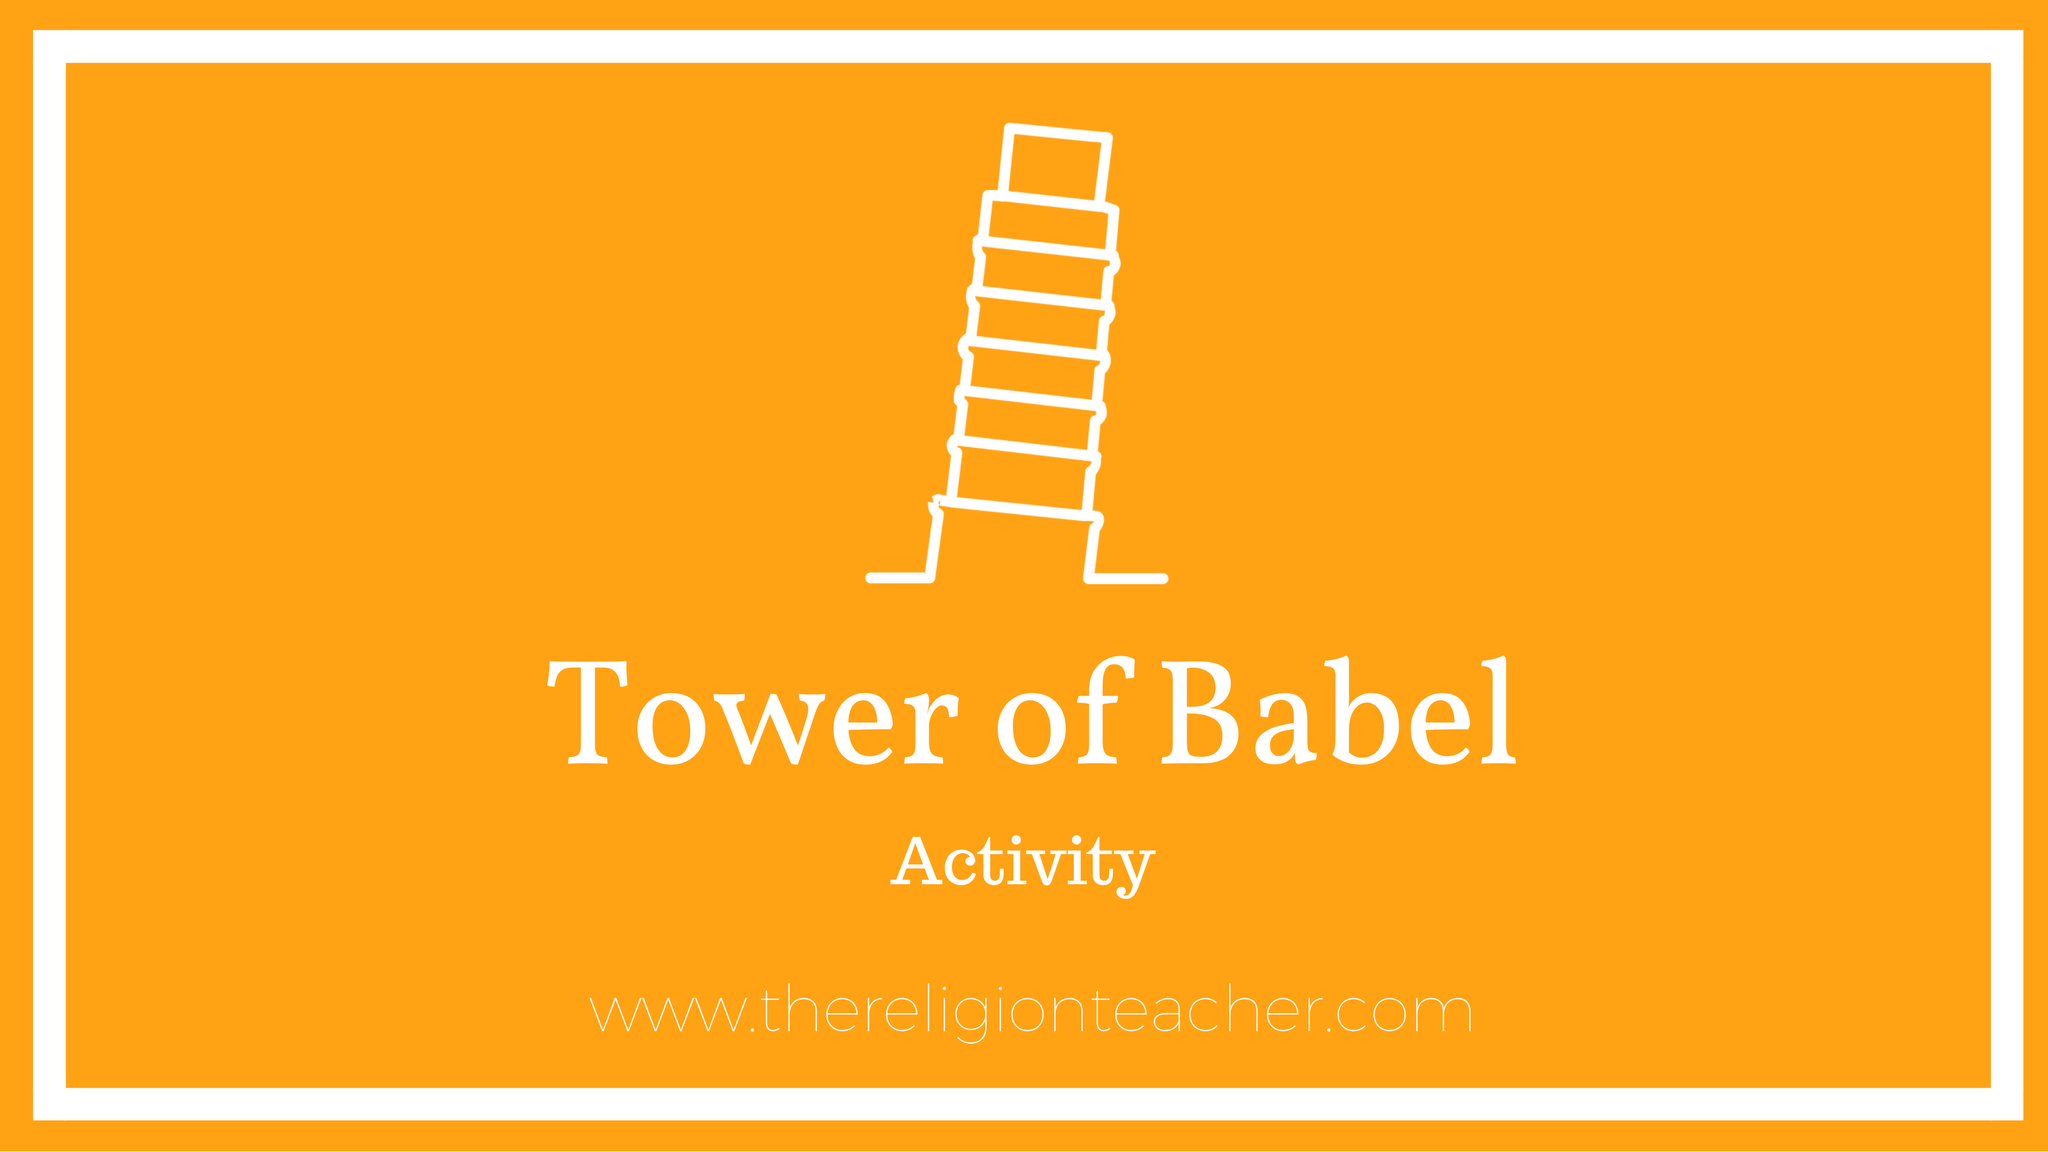 Tower of Babel Activity